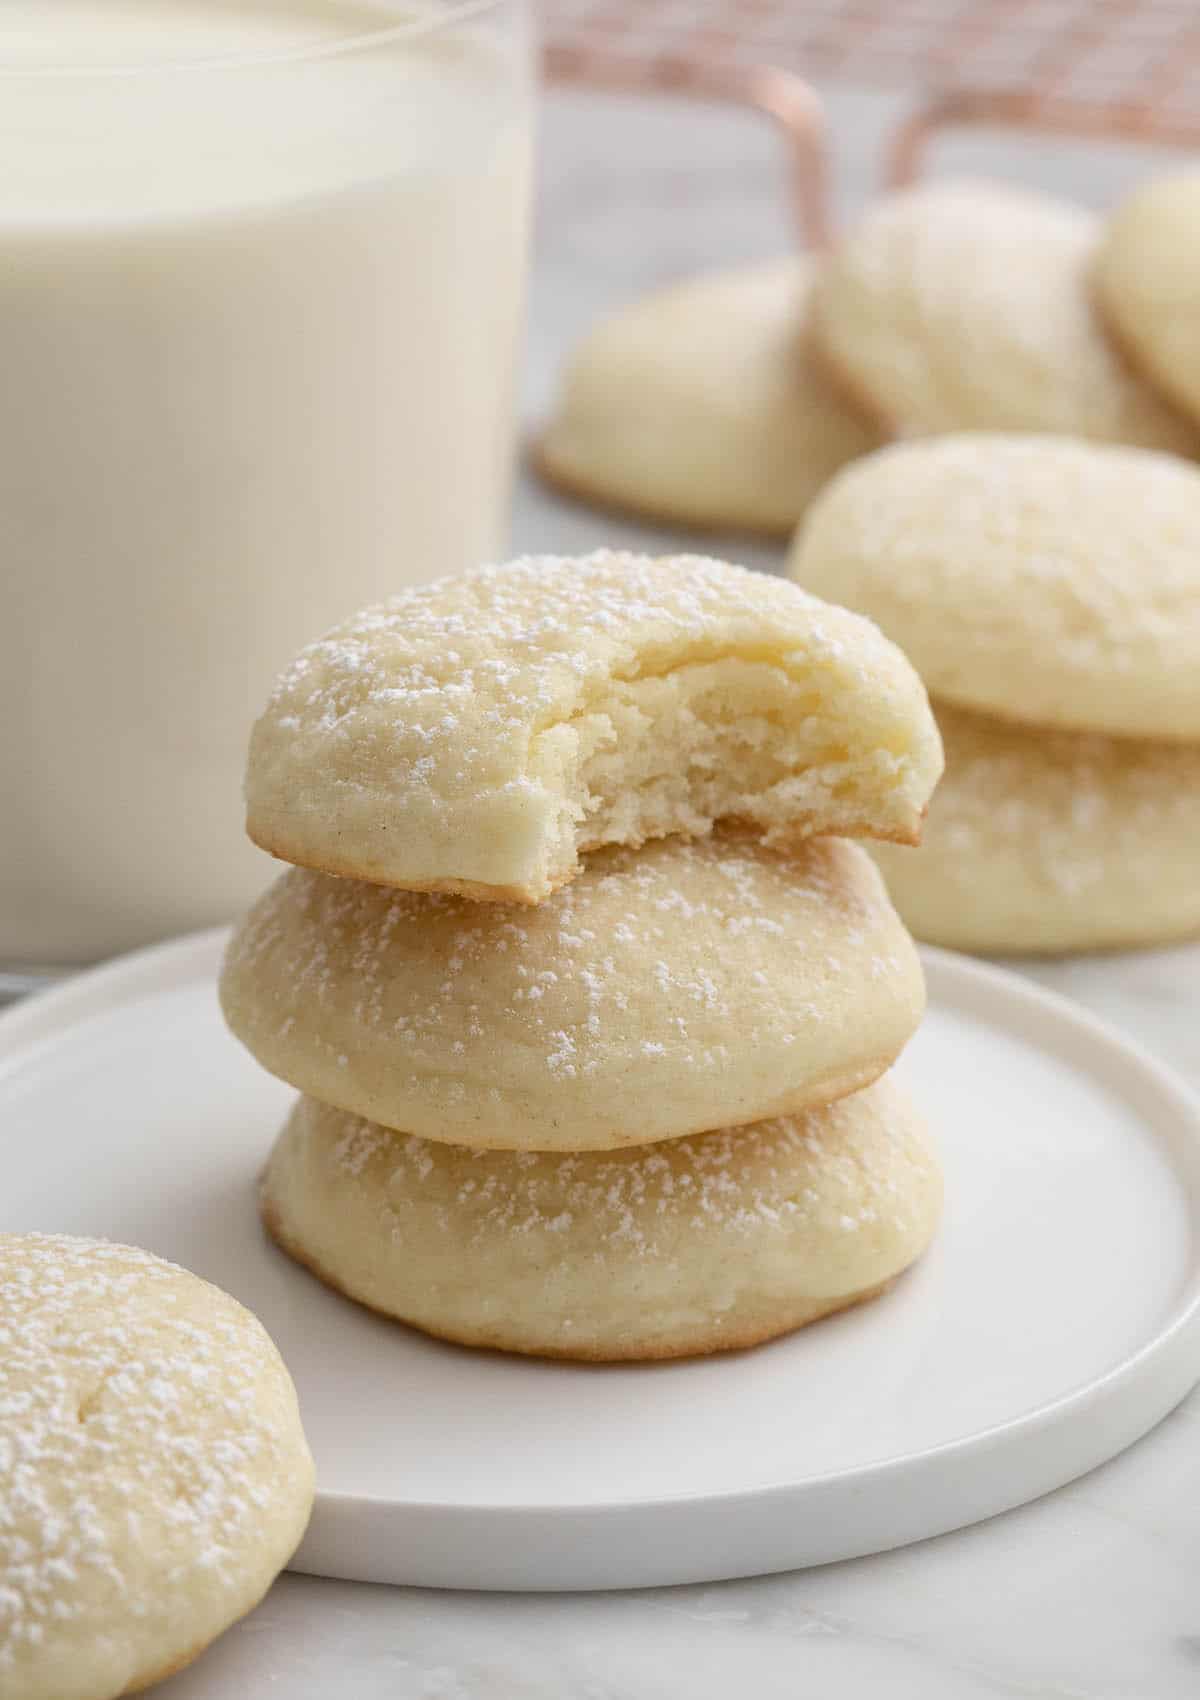 Cream cheese cookies stacked next to a glass of milk.